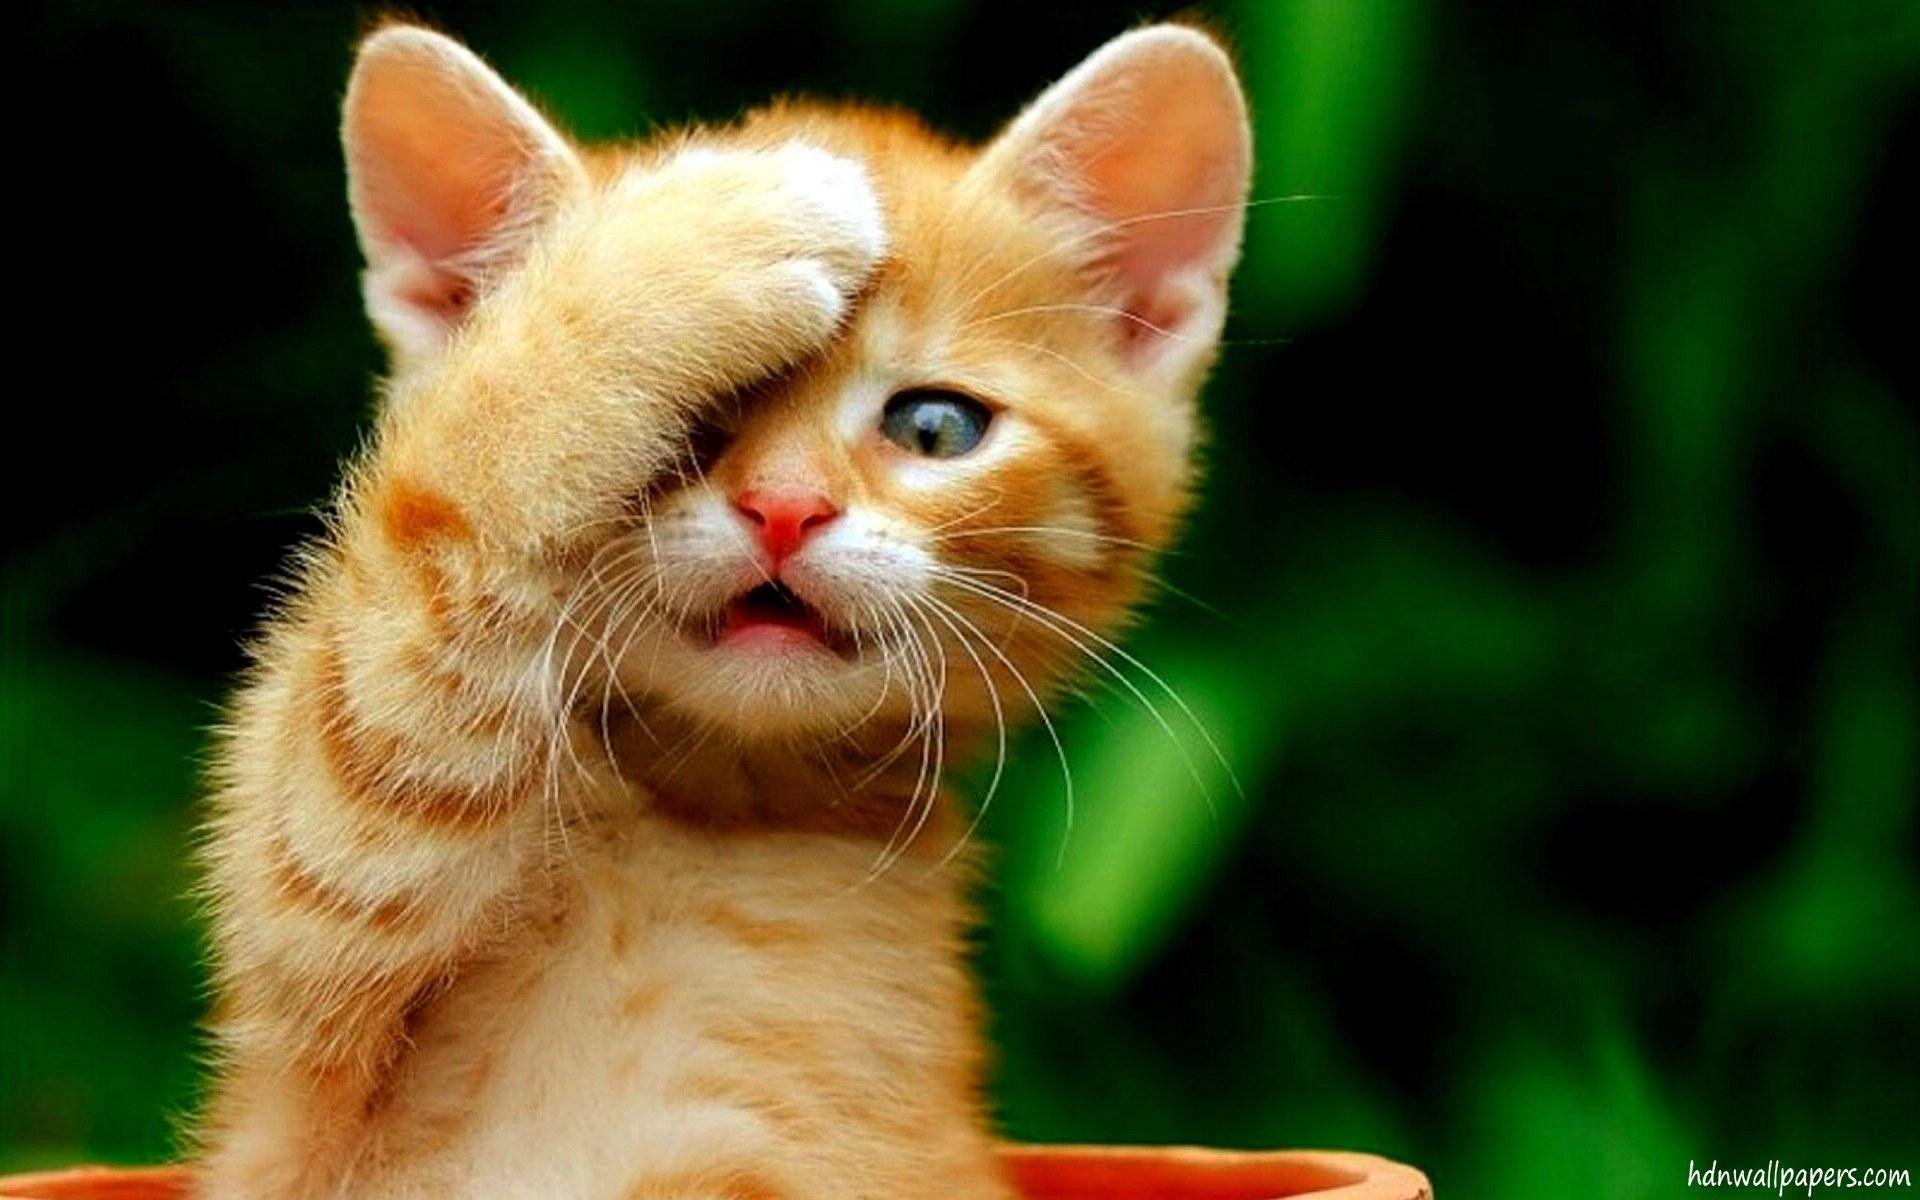 Cute Kitten Wallpapers HD Free Download For PC